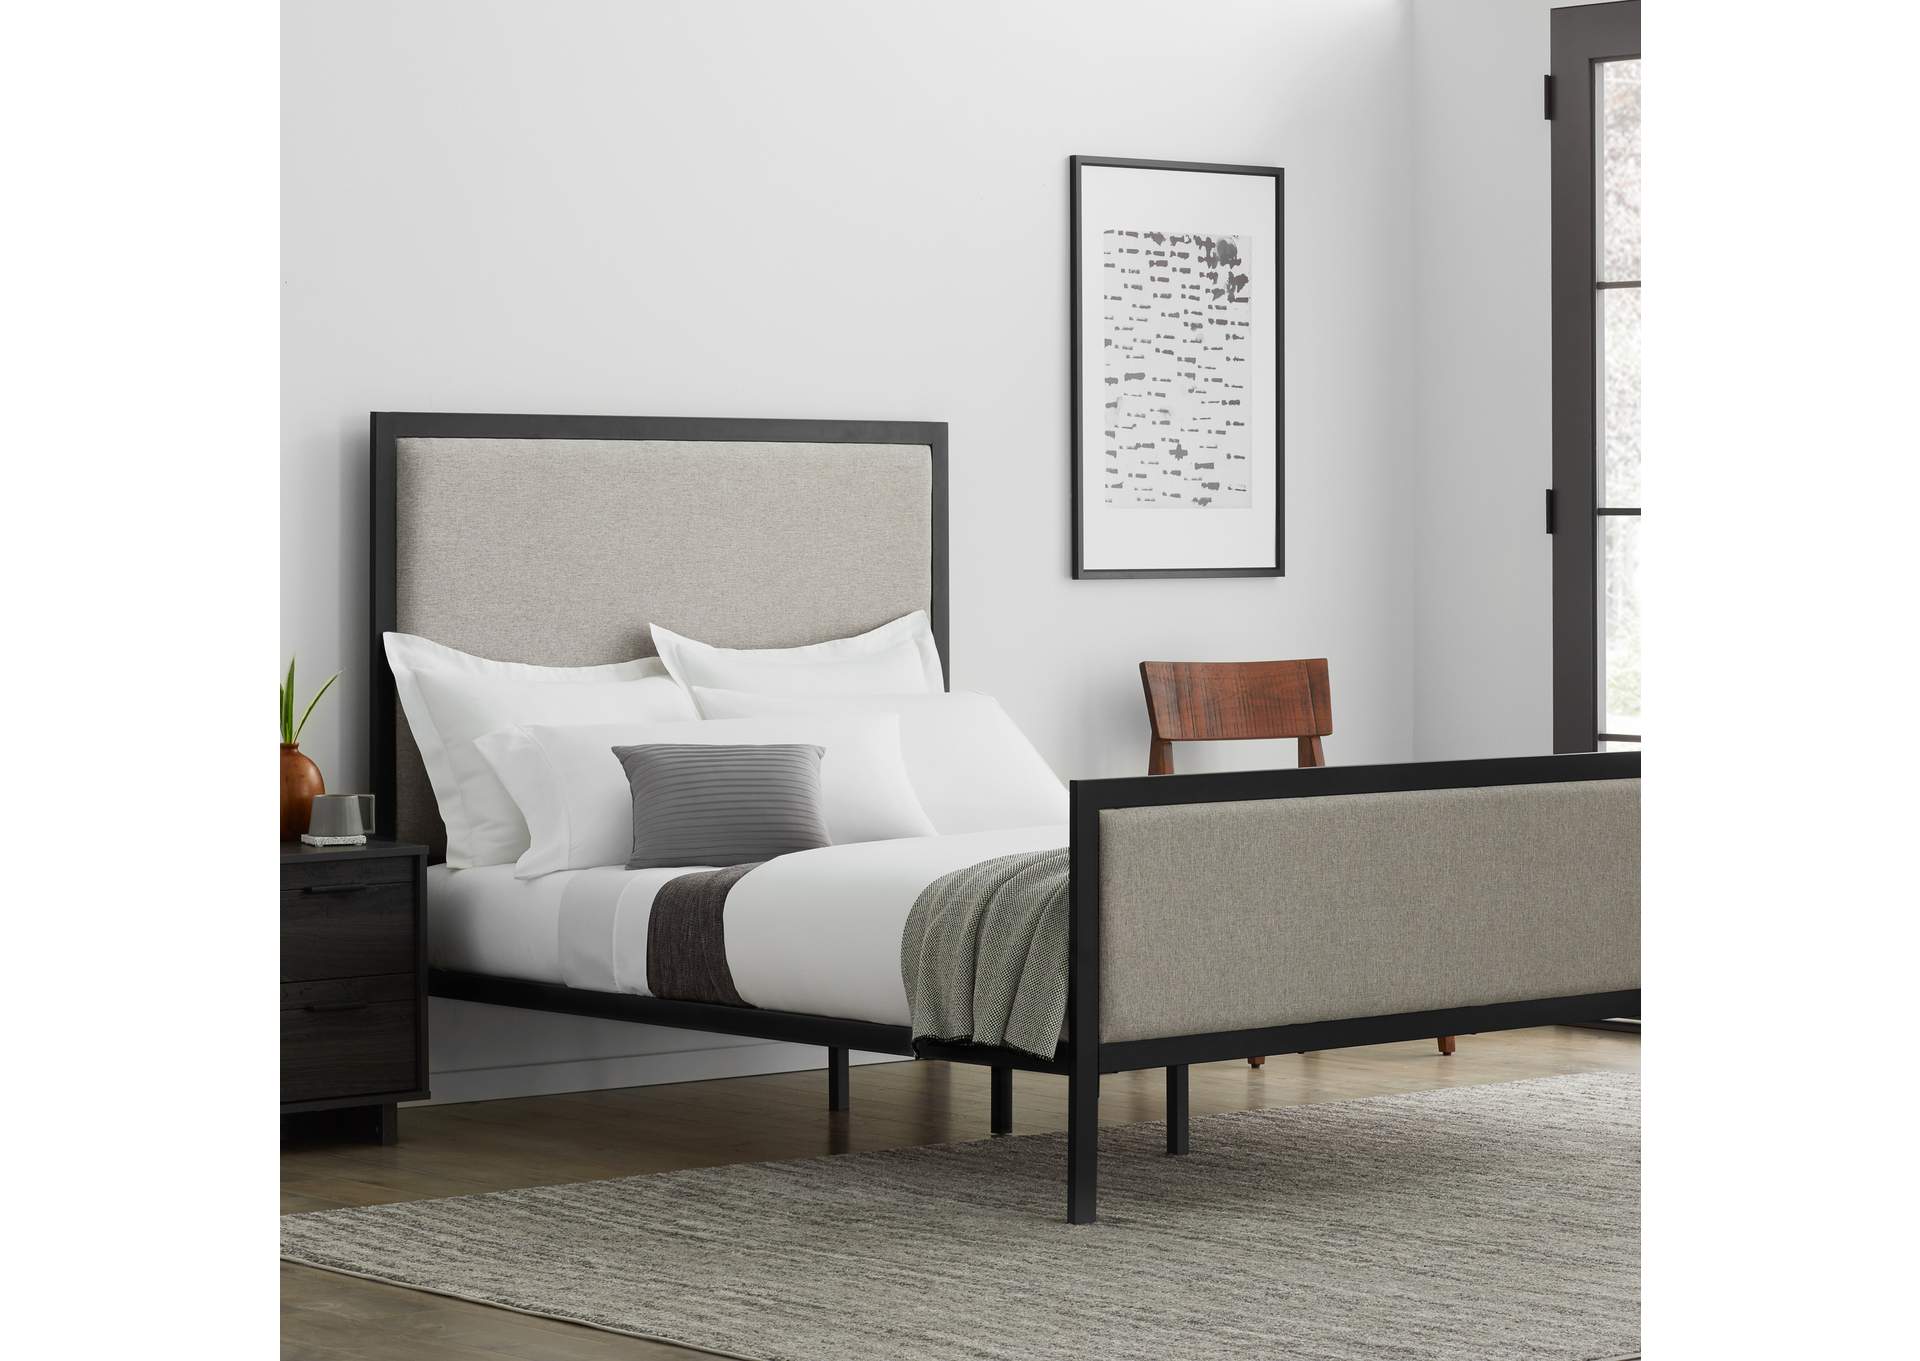 Malouf Charcoal Clarke Metal Upholstered Queen Bed,Malouf